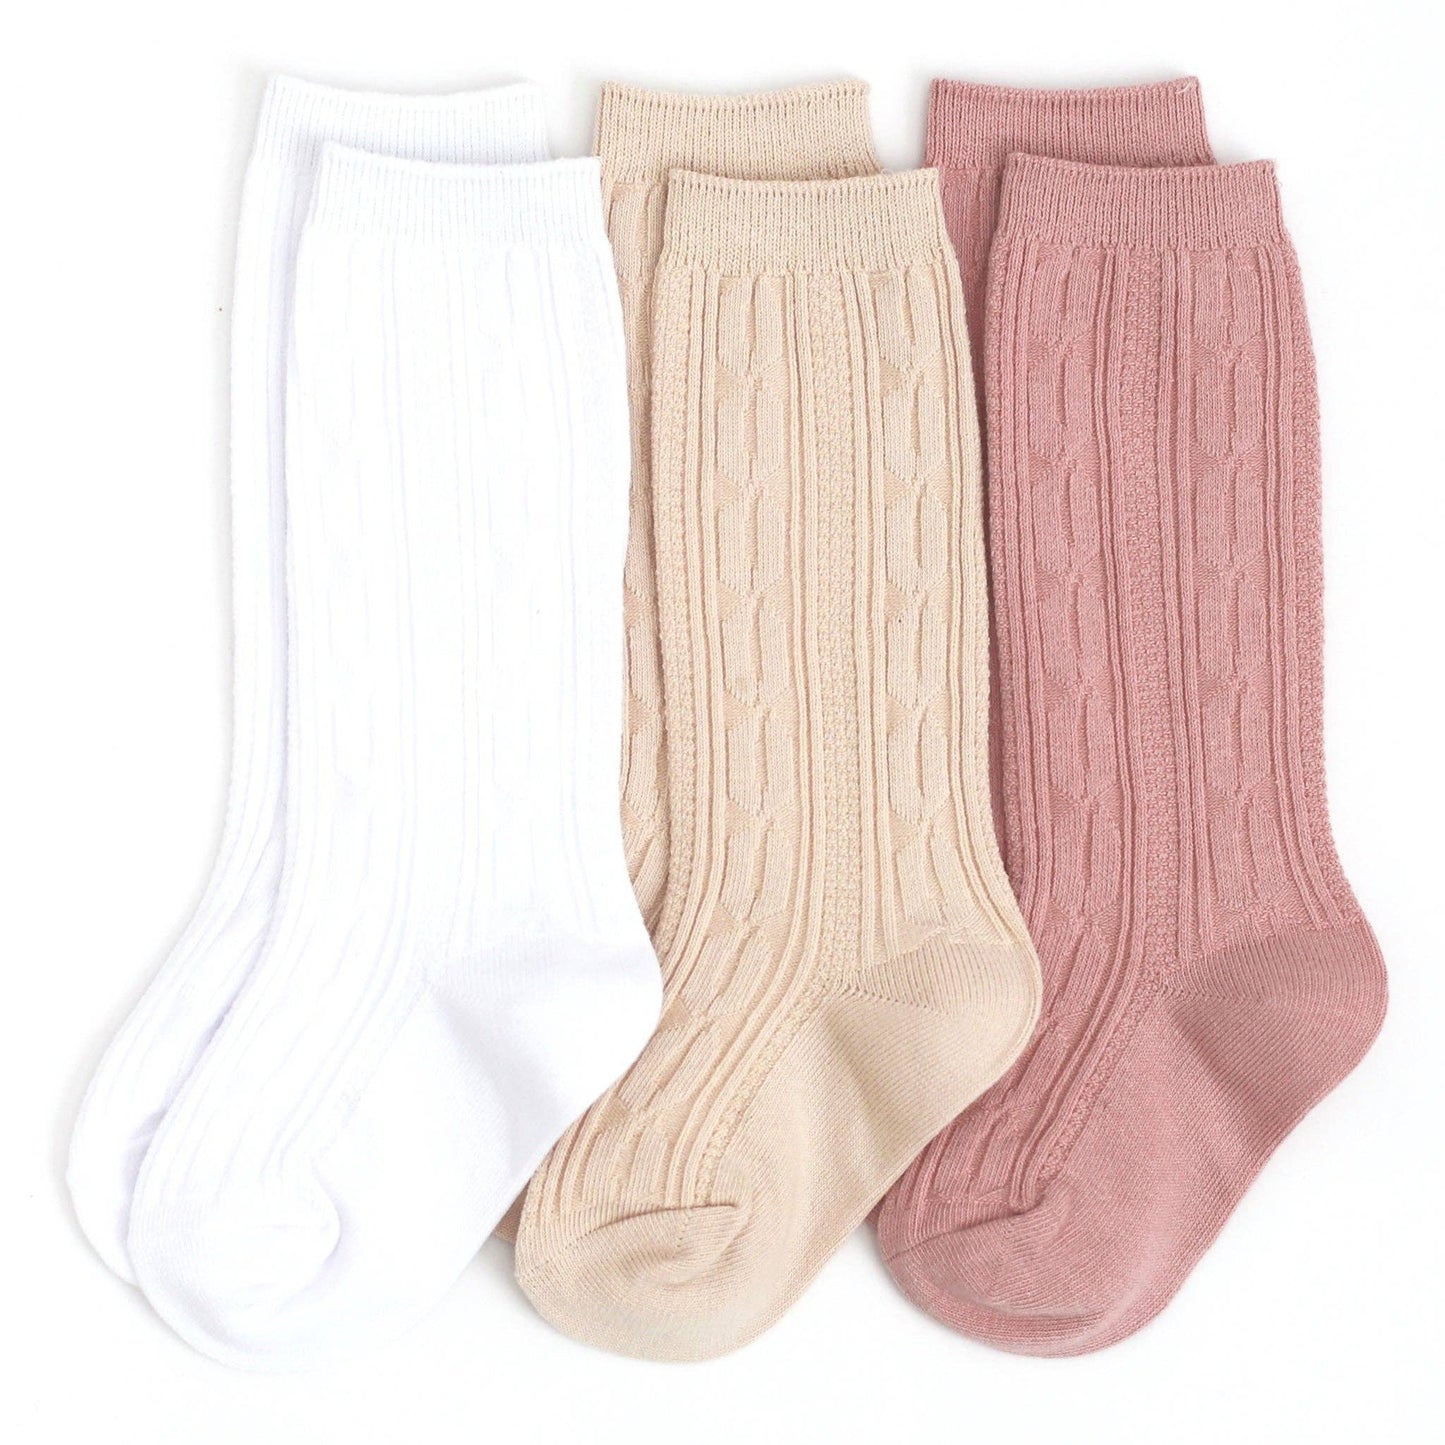 Girlhood Cable Knit Knee High Sock 3-Pack: 0-6 MONTHS